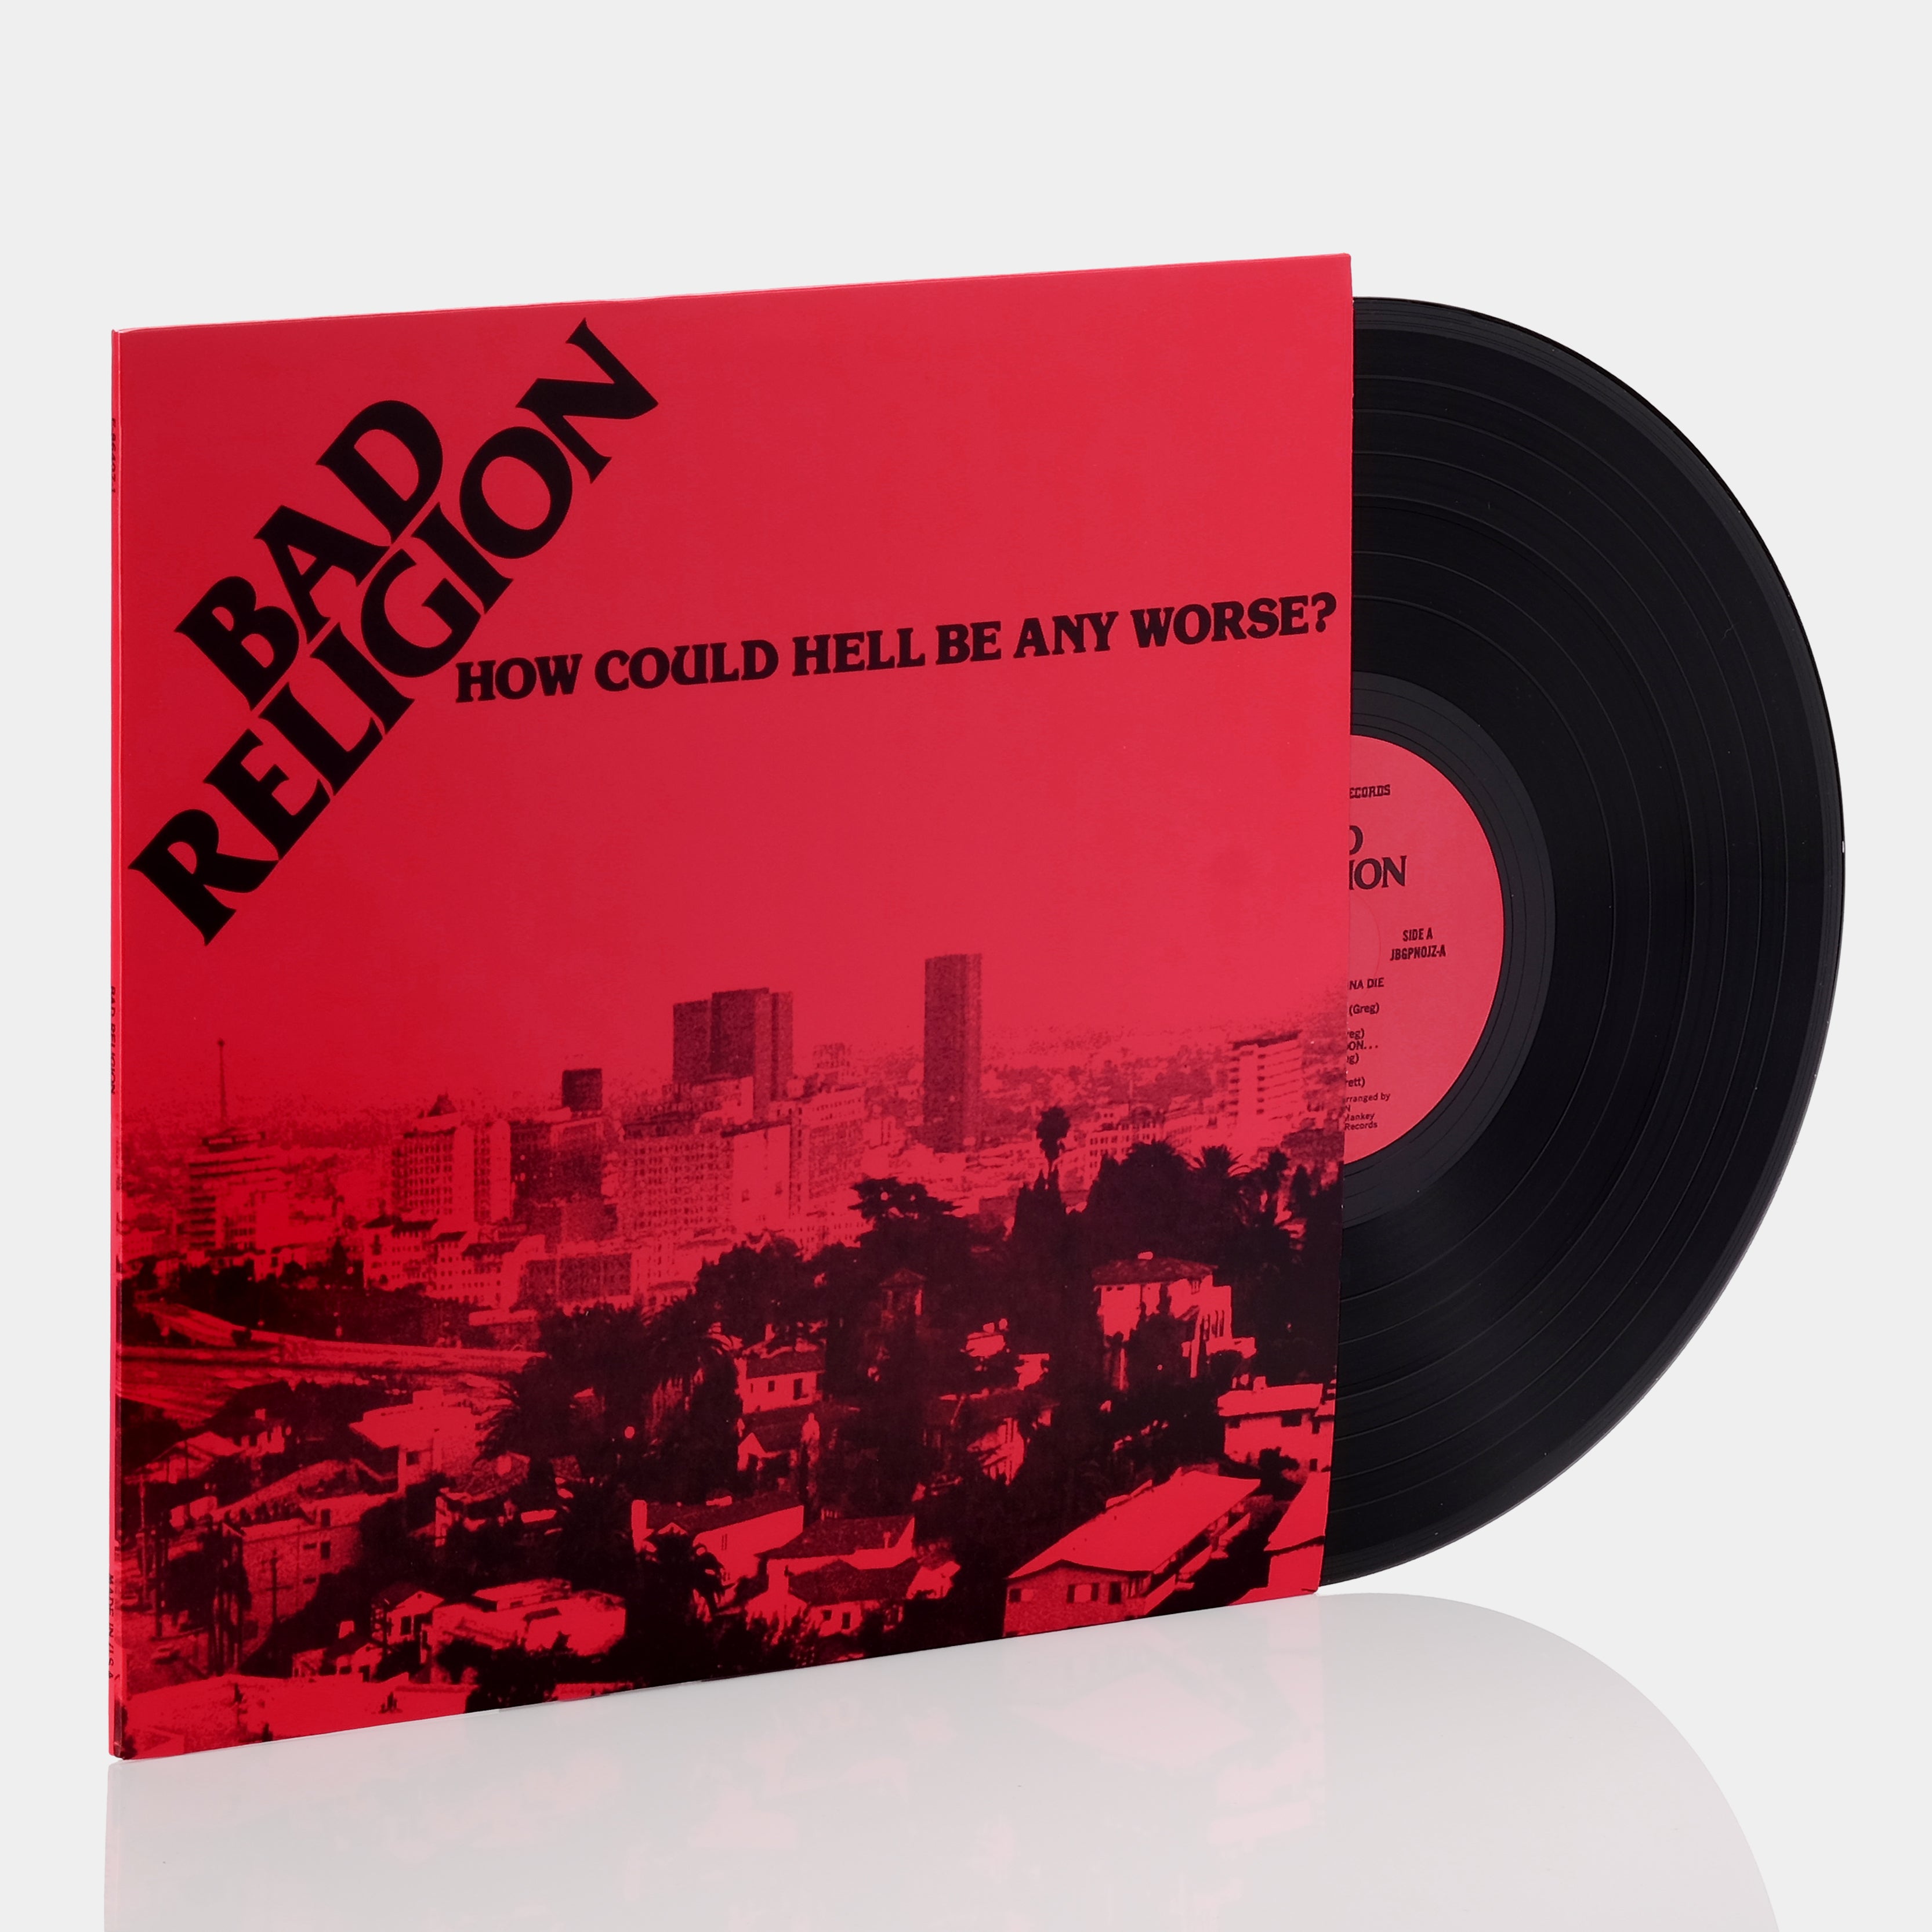 Bad Religion - How Could Hell Be Any Worse? LP Vinyl Record